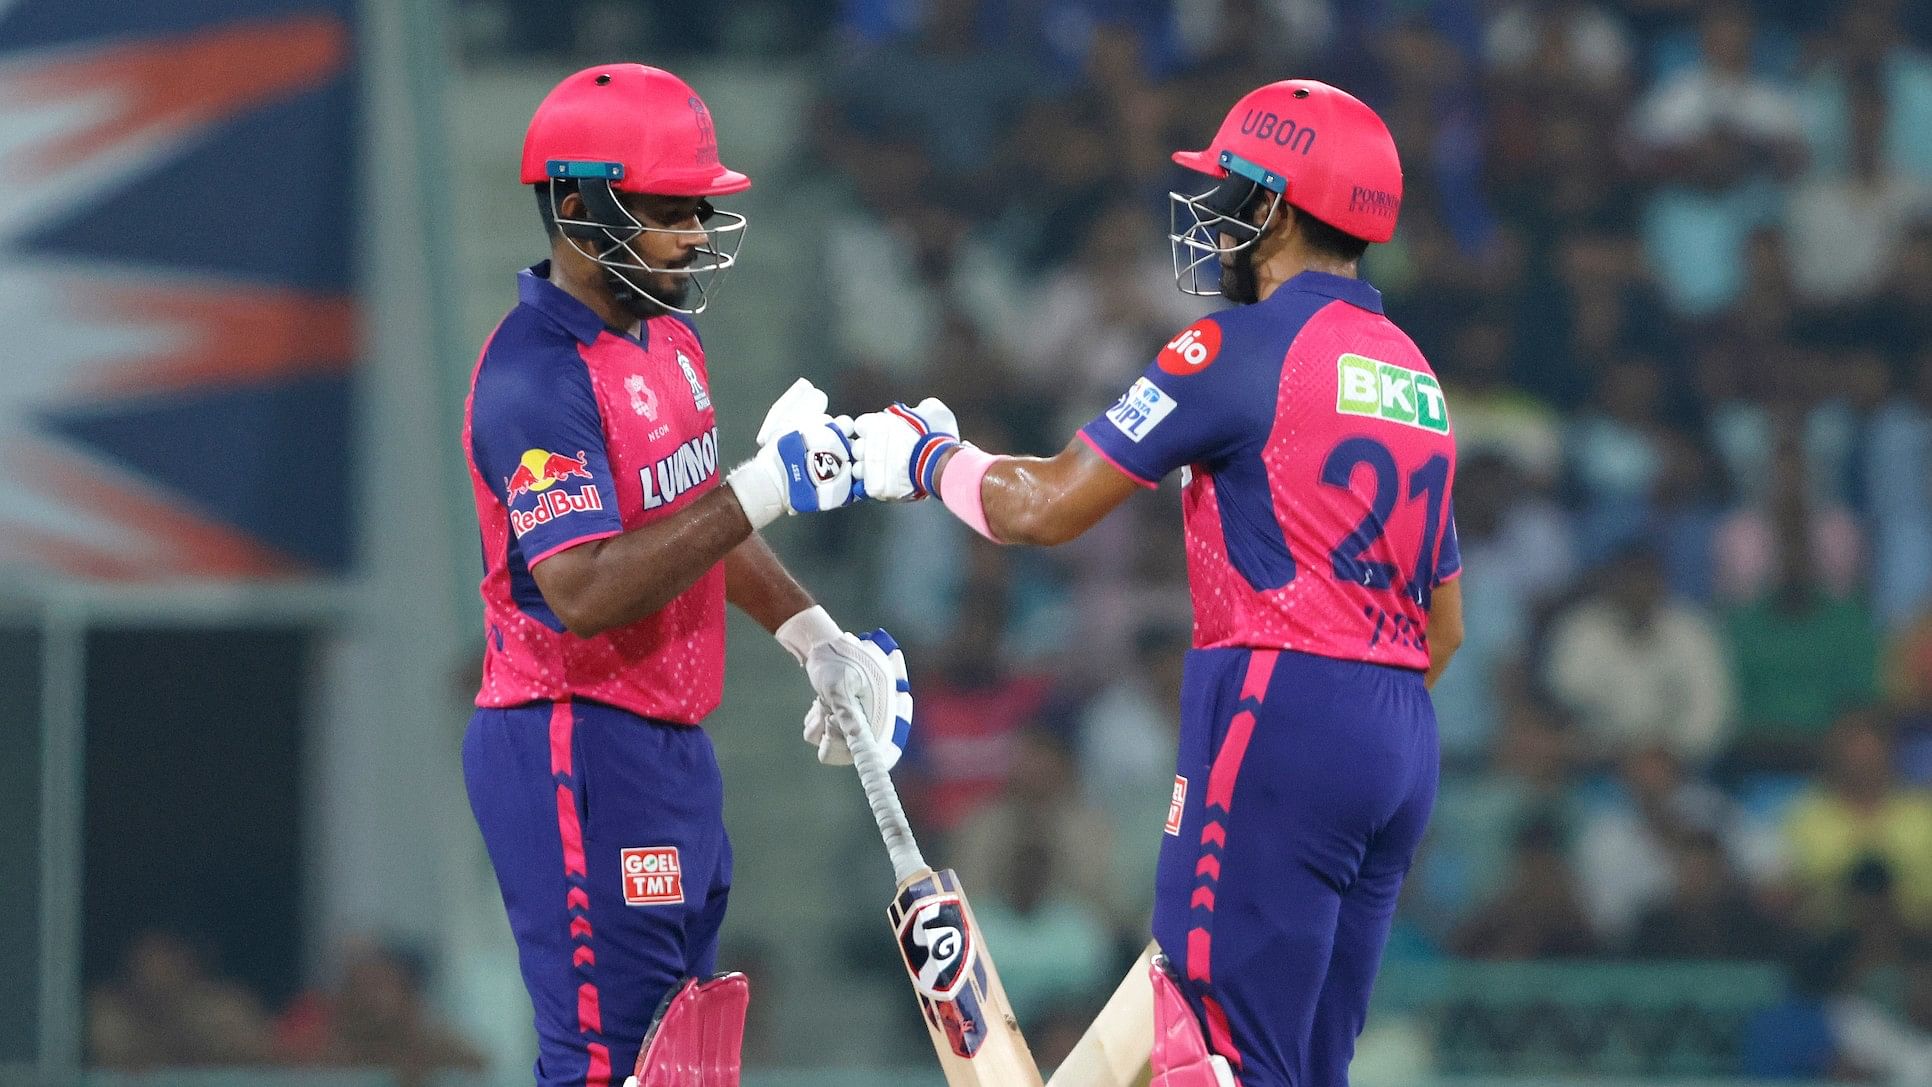 <div class="paragraphs"><p>RR vs LSG:&nbsp;Sanju Samson and Dhruv Jurel's half-centuries propel RR to a comfortable victory over LSG by 7 wickets.</p></div>